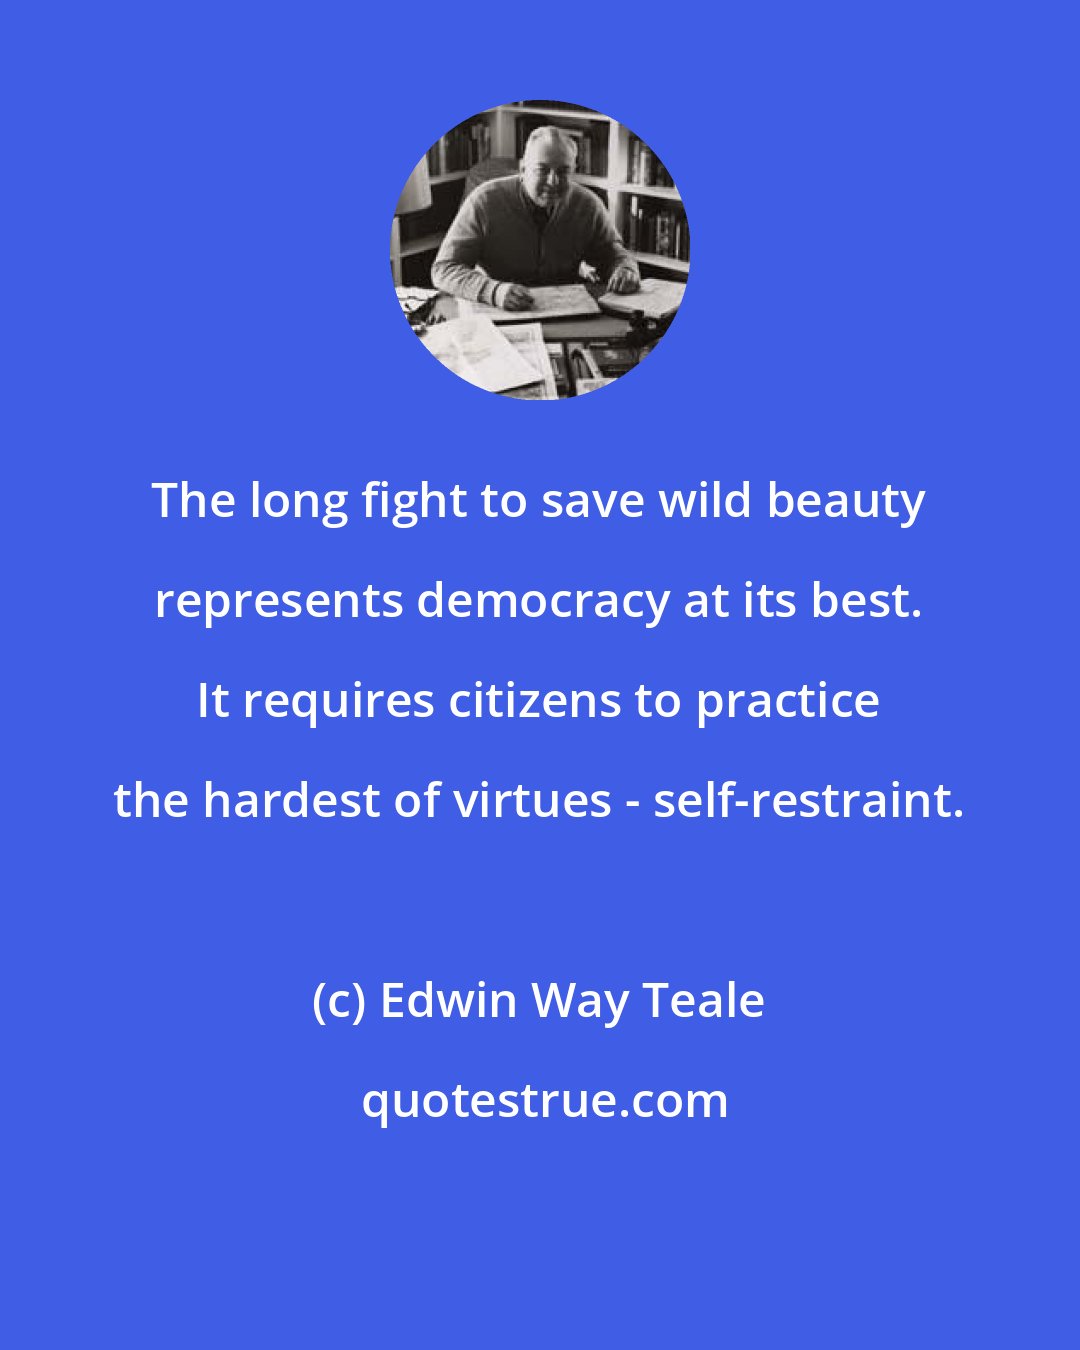 Edwin Way Teale: The long fight to save wild beauty represents democracy at its best. It requires citizens to practice the hardest of virtues - self-restraint.